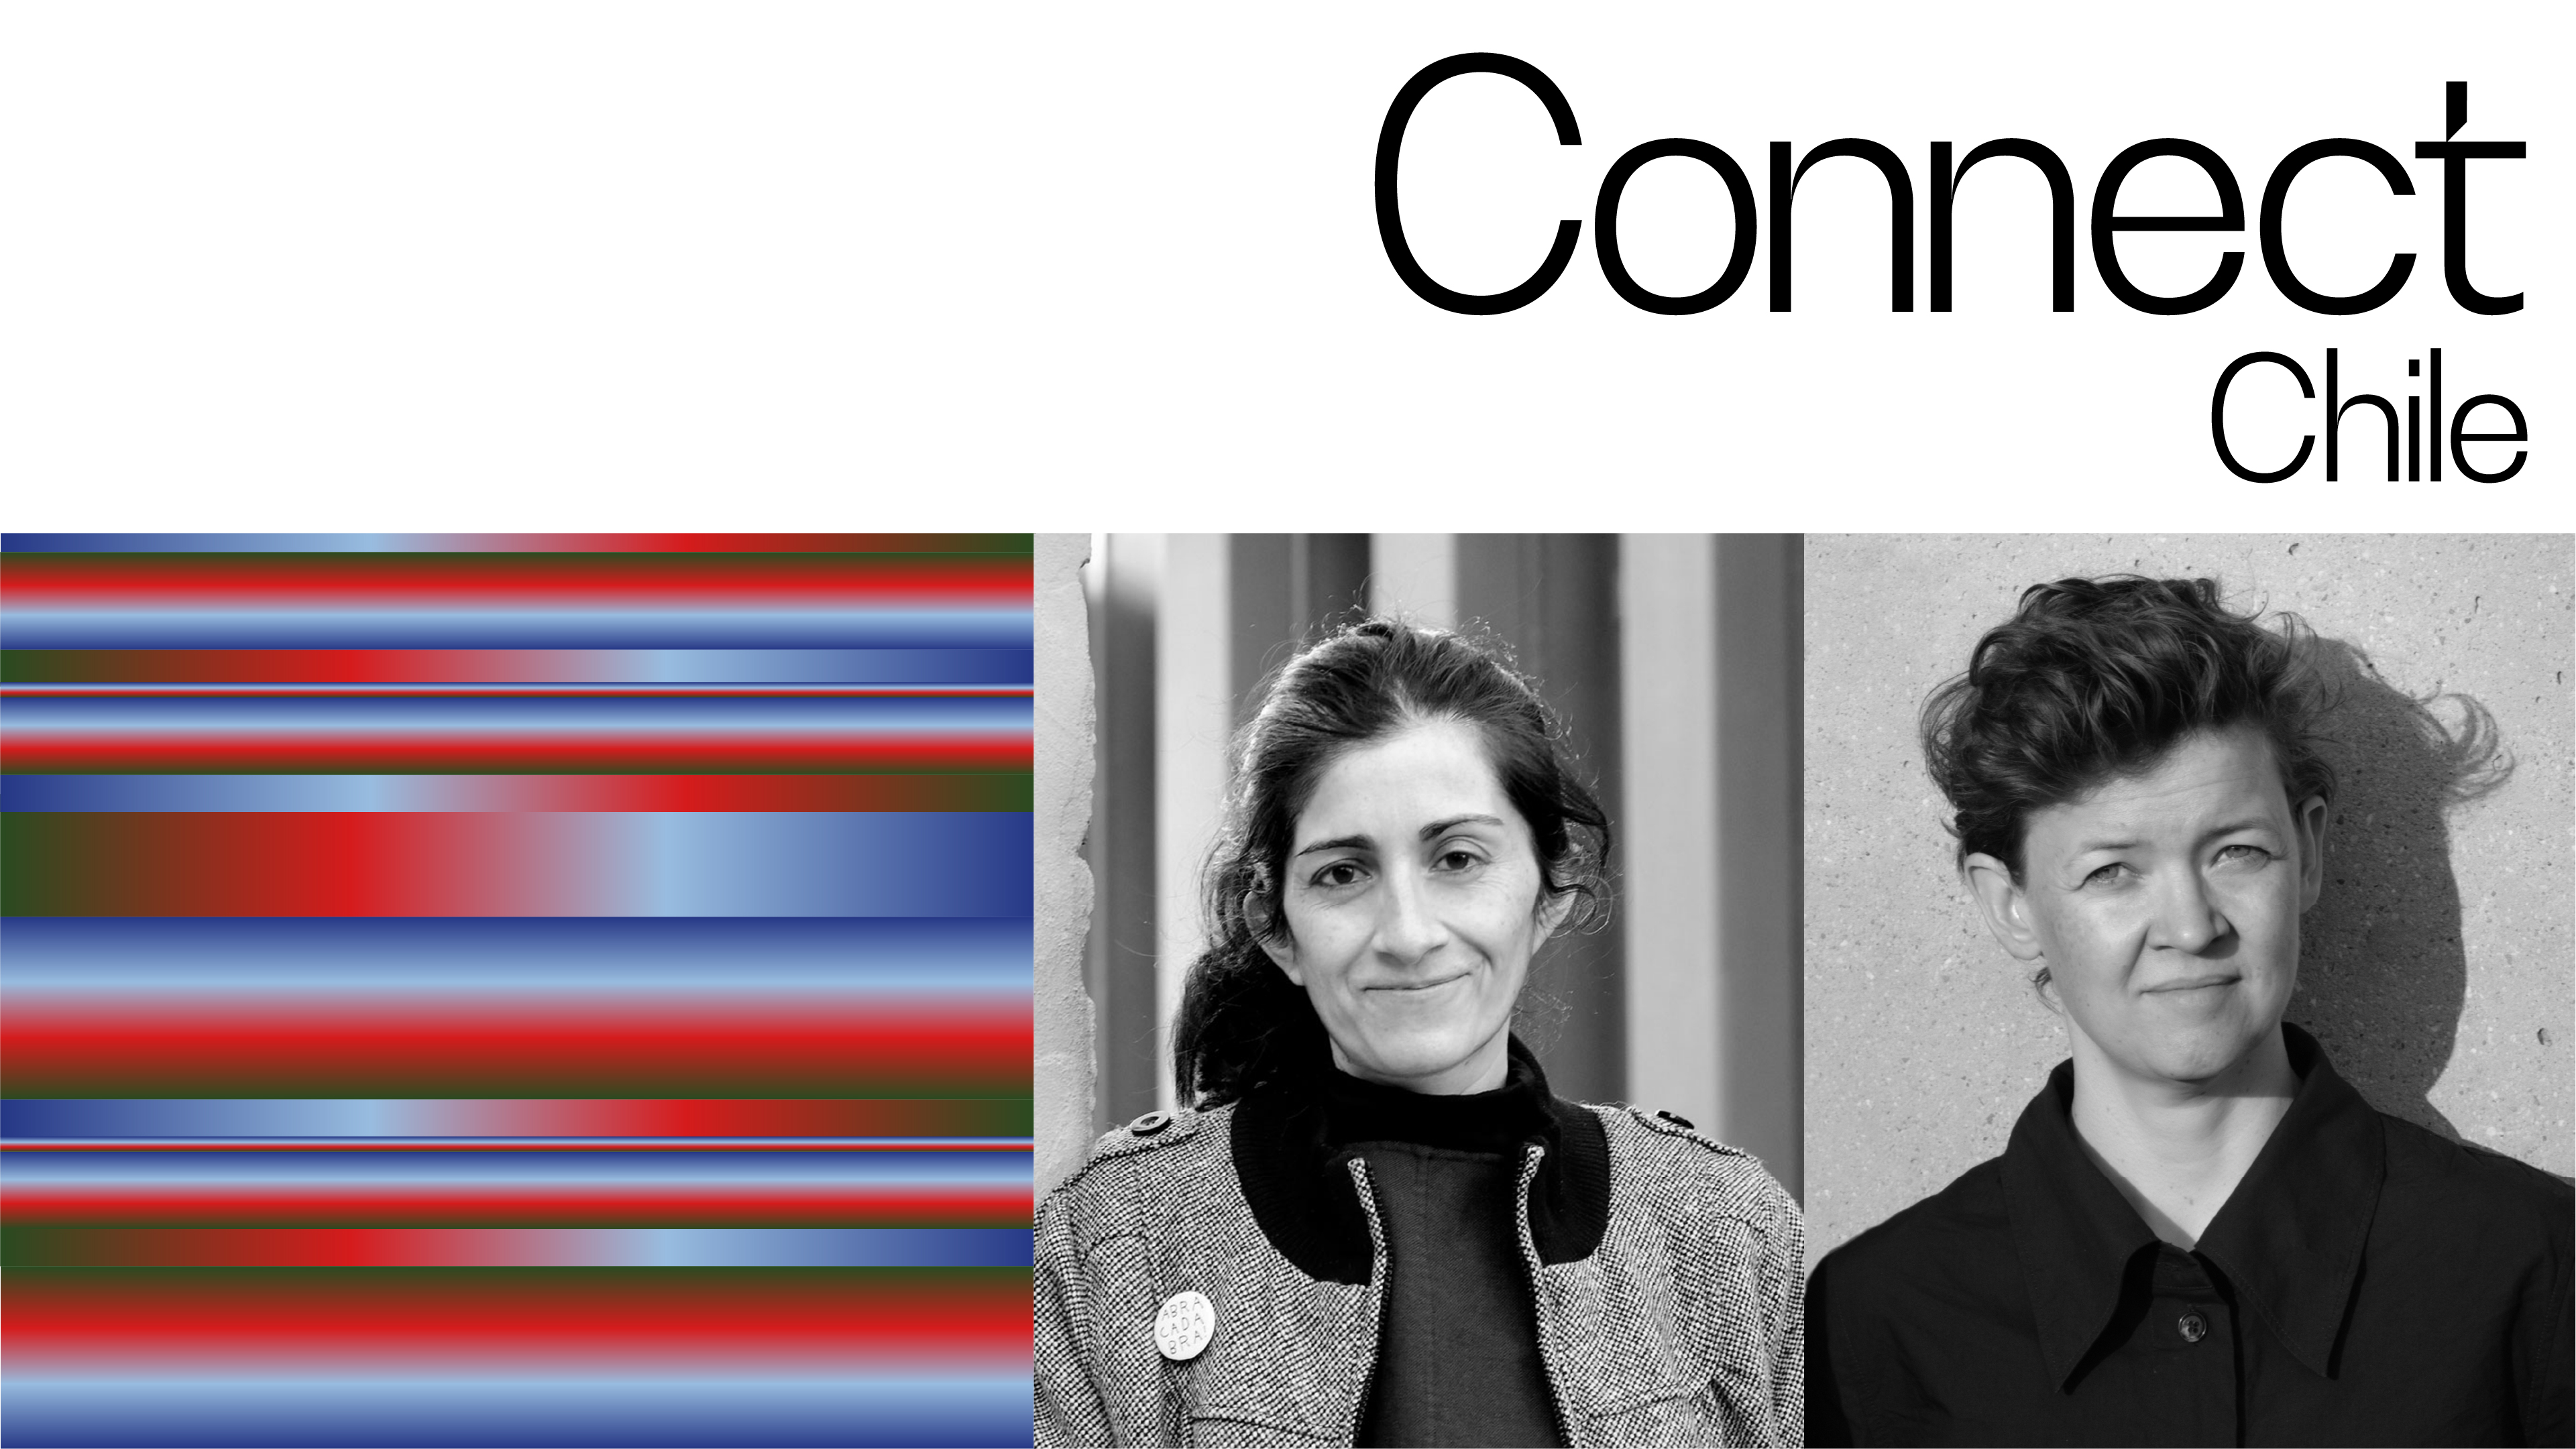 Chilean artist Marcela Moraga and Swiss artist Dominique Koch are the two selected artists for the Connect Chile dual residency